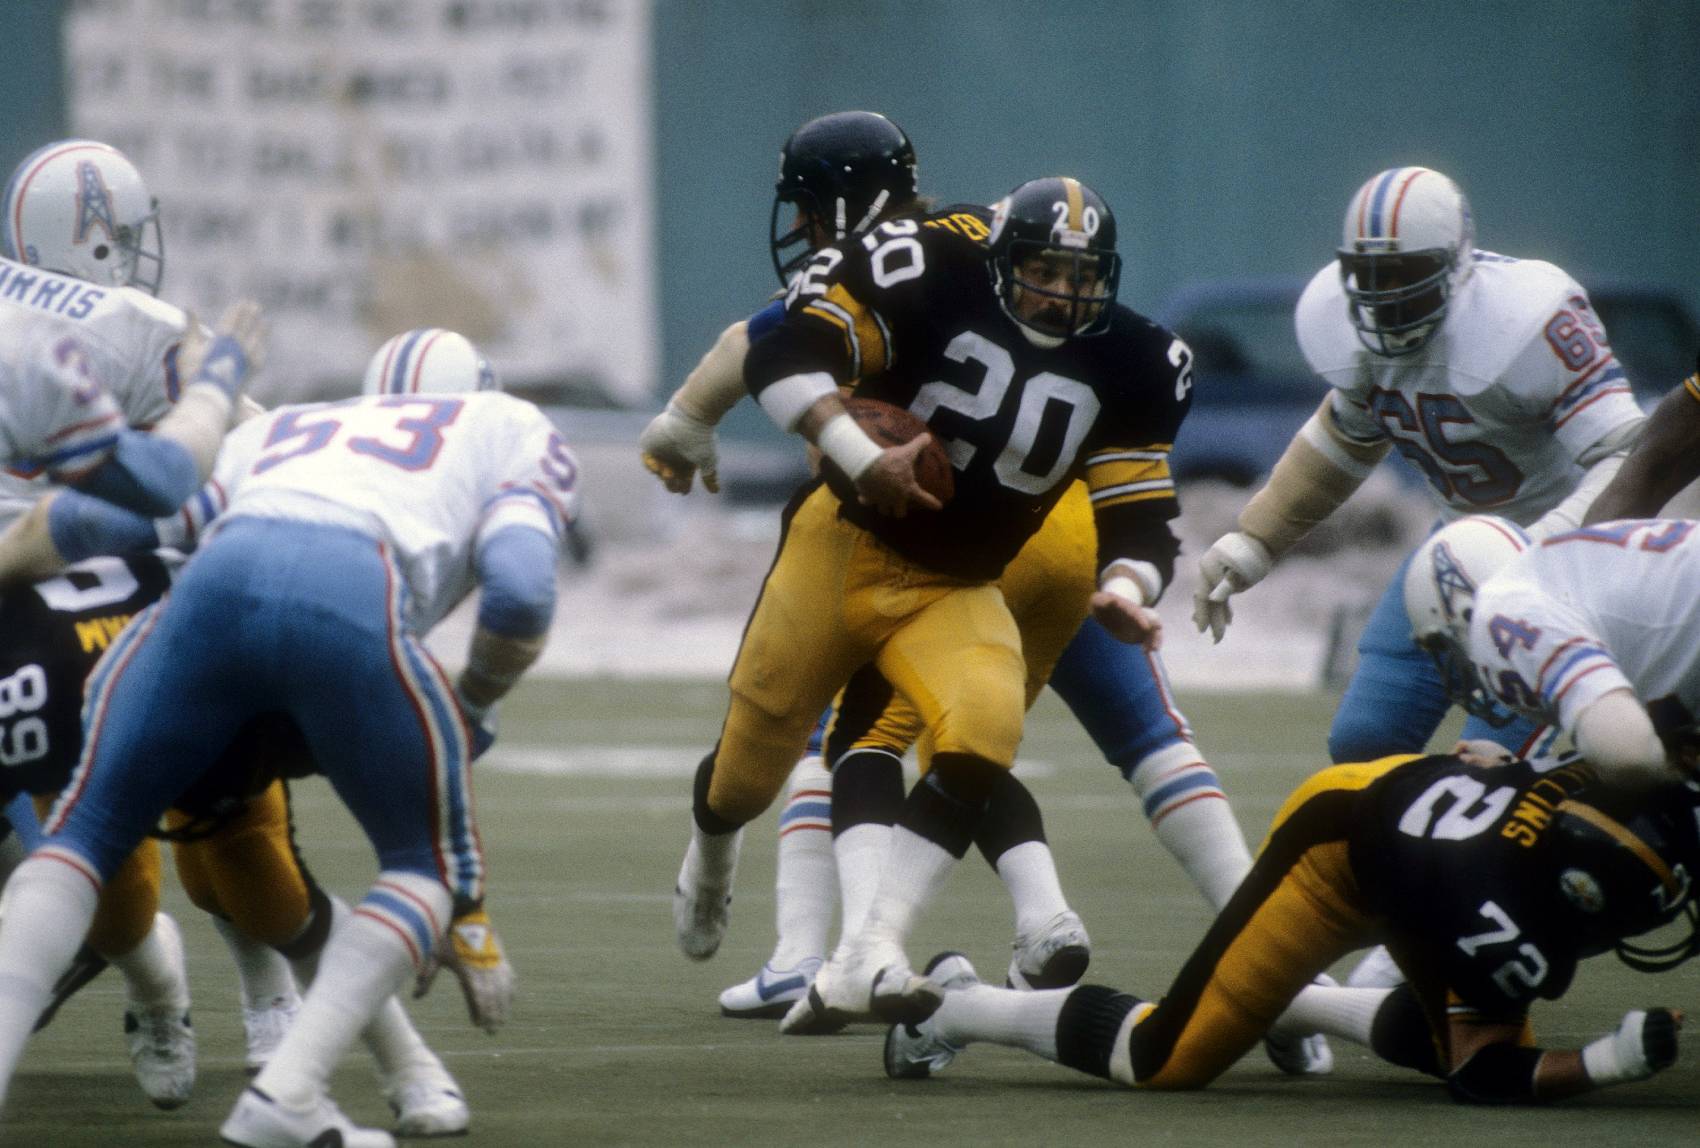 Longtime Steelers running back Rockey Bleier returned to the NFL after he suffered a grenade-related injury.